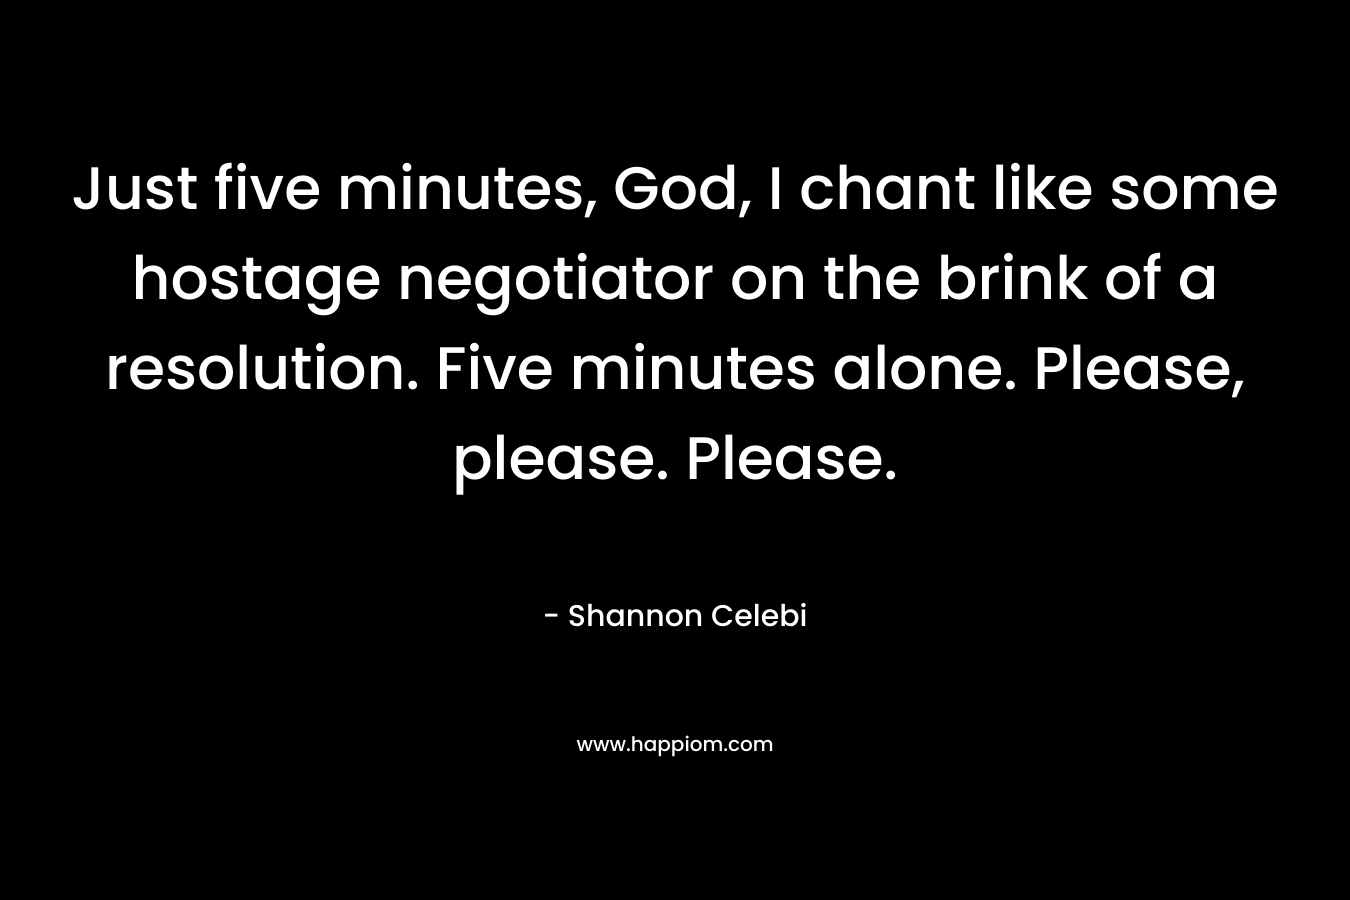 Just five minutes, God, I chant like some hostage negotiator on the brink of a resolution. Five minutes alone. Please, please. Please. – Shannon Celebi